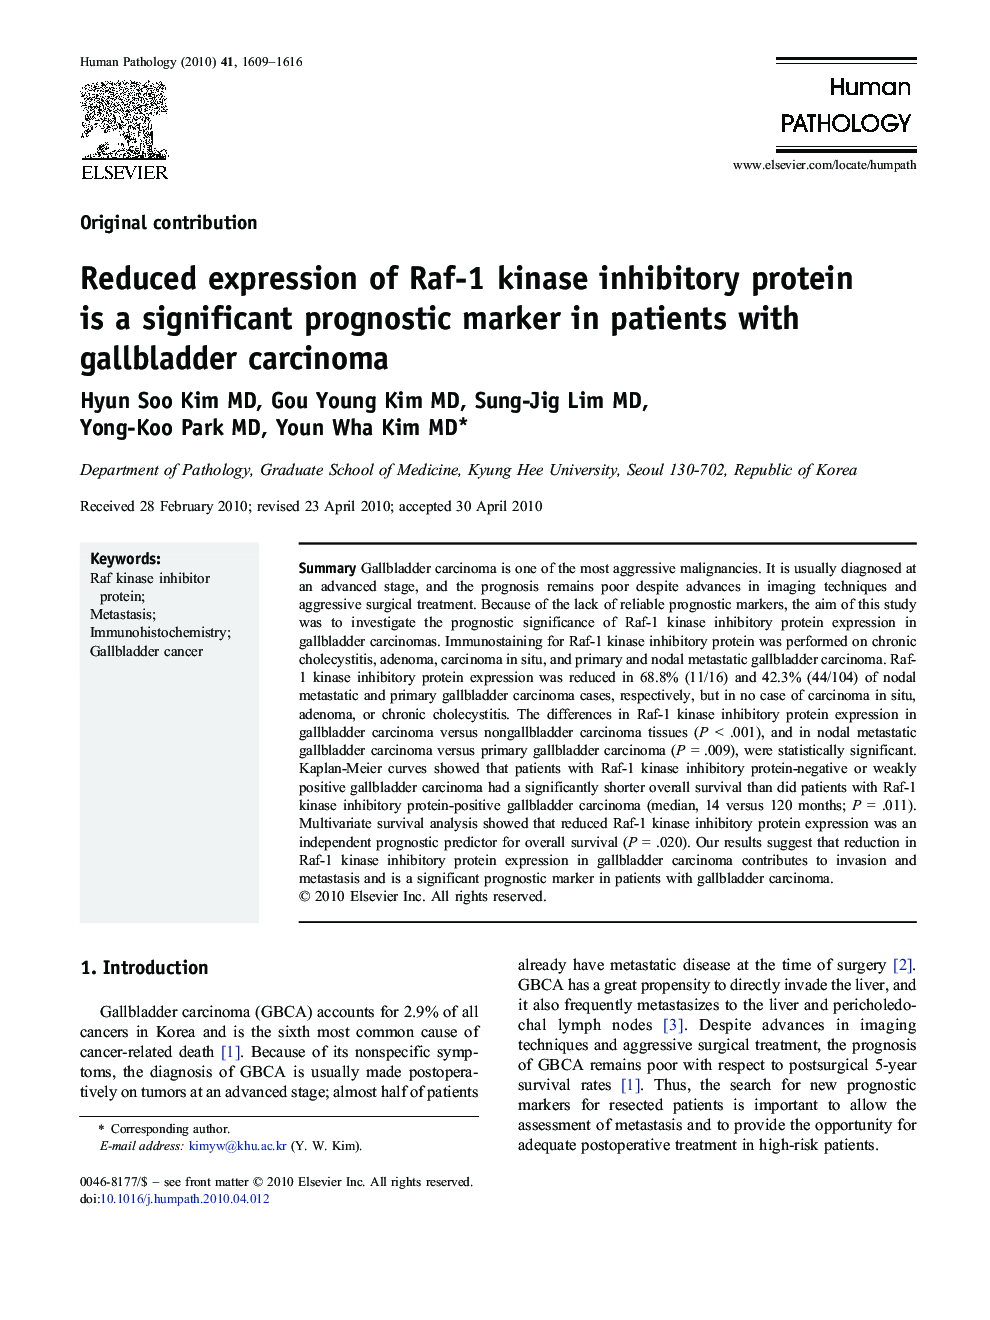 Reduced expression of Raf-1 kinase inhibitory protein is a significant prognostic marker in patients with gallbladder carcinoma